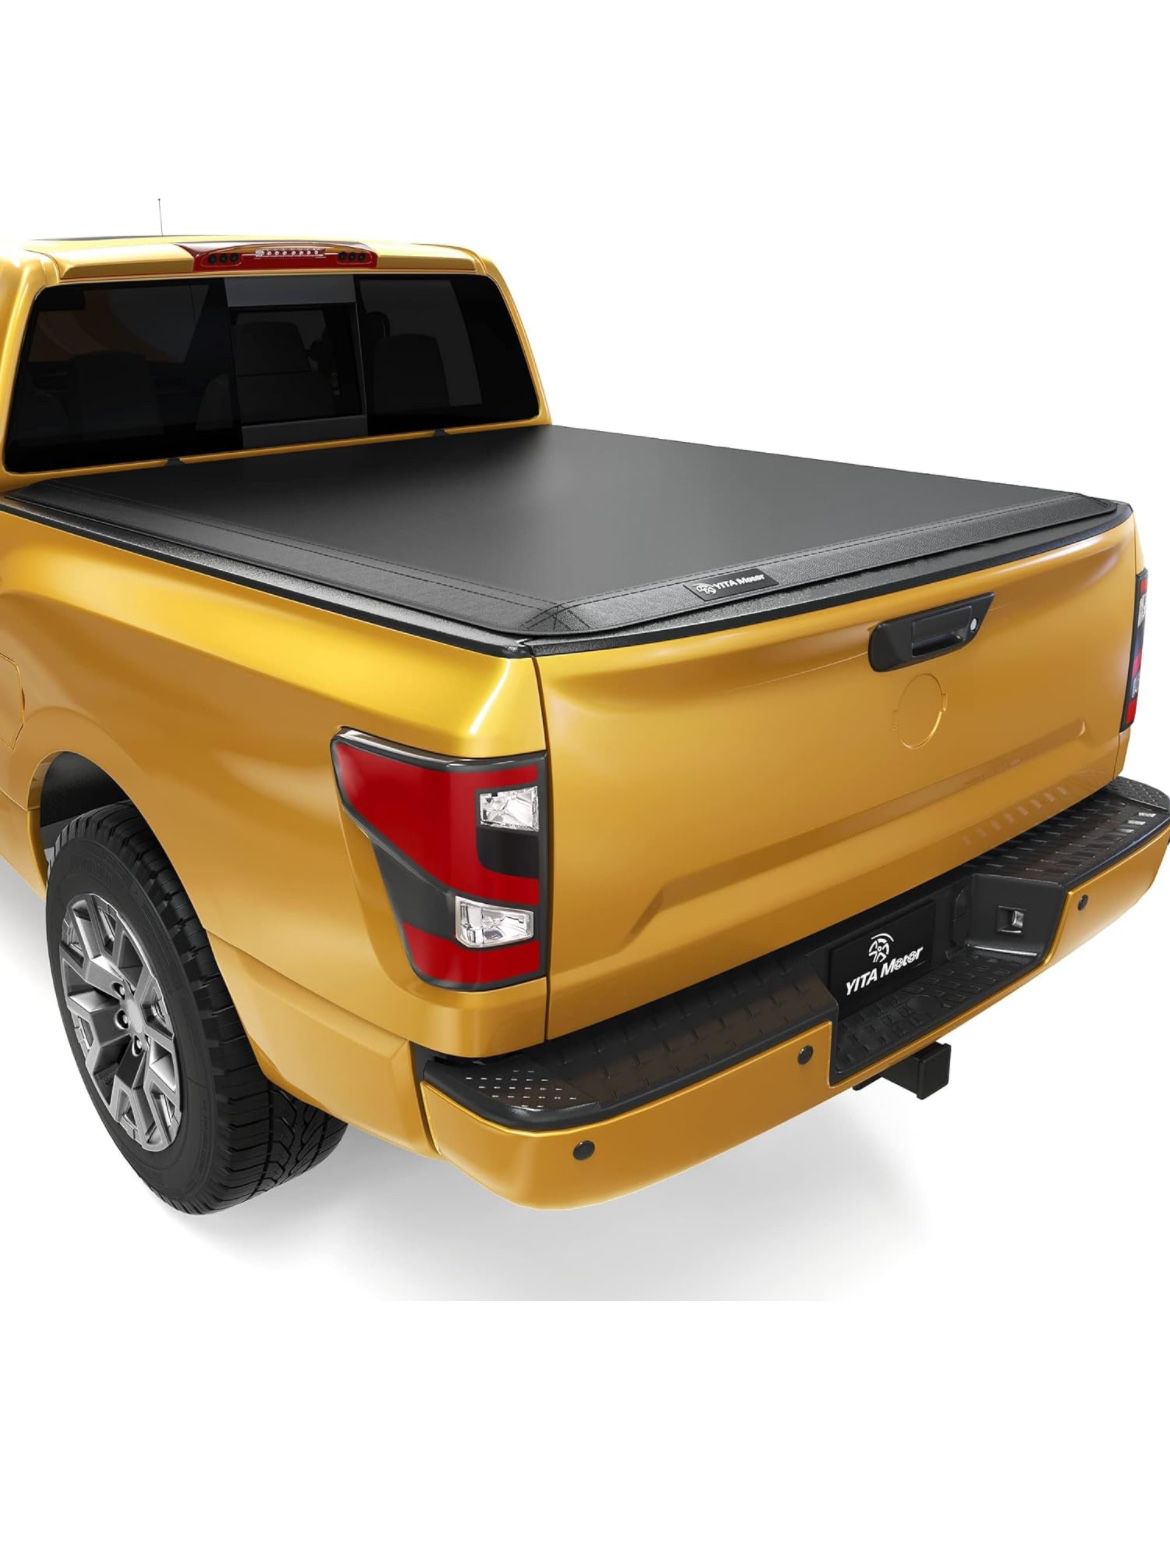 YITAMOTOR Soft Quad Fold Truck Bed Tonneau Cover For 2004-2015 Nissan Titan, Fleetside 5.5 ft Bed 